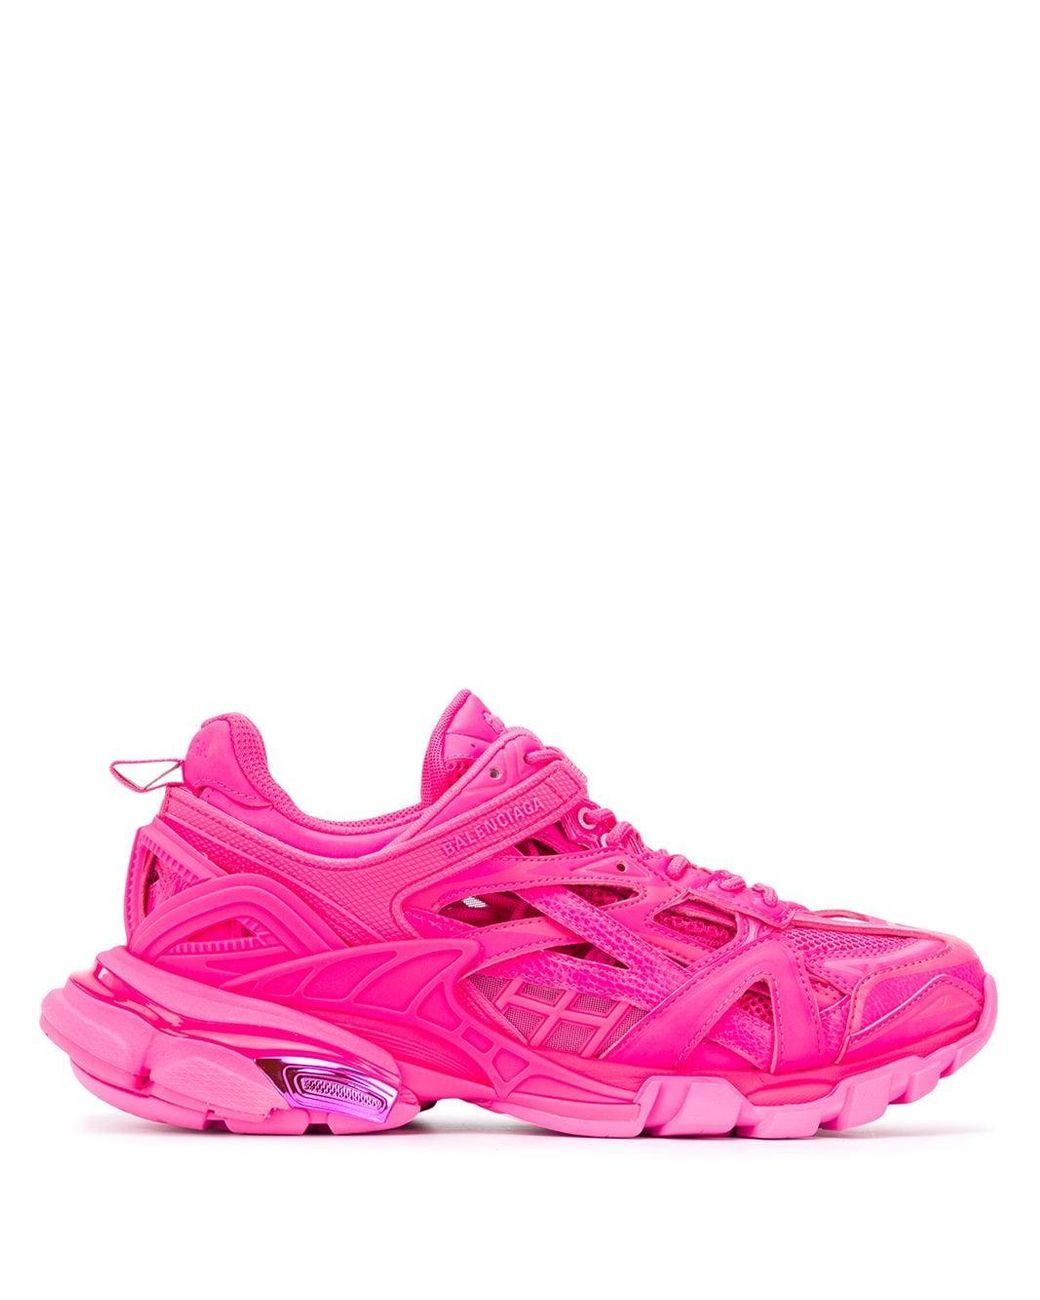 Balenciaga Track.2 Sneakers in Pink - Lyst